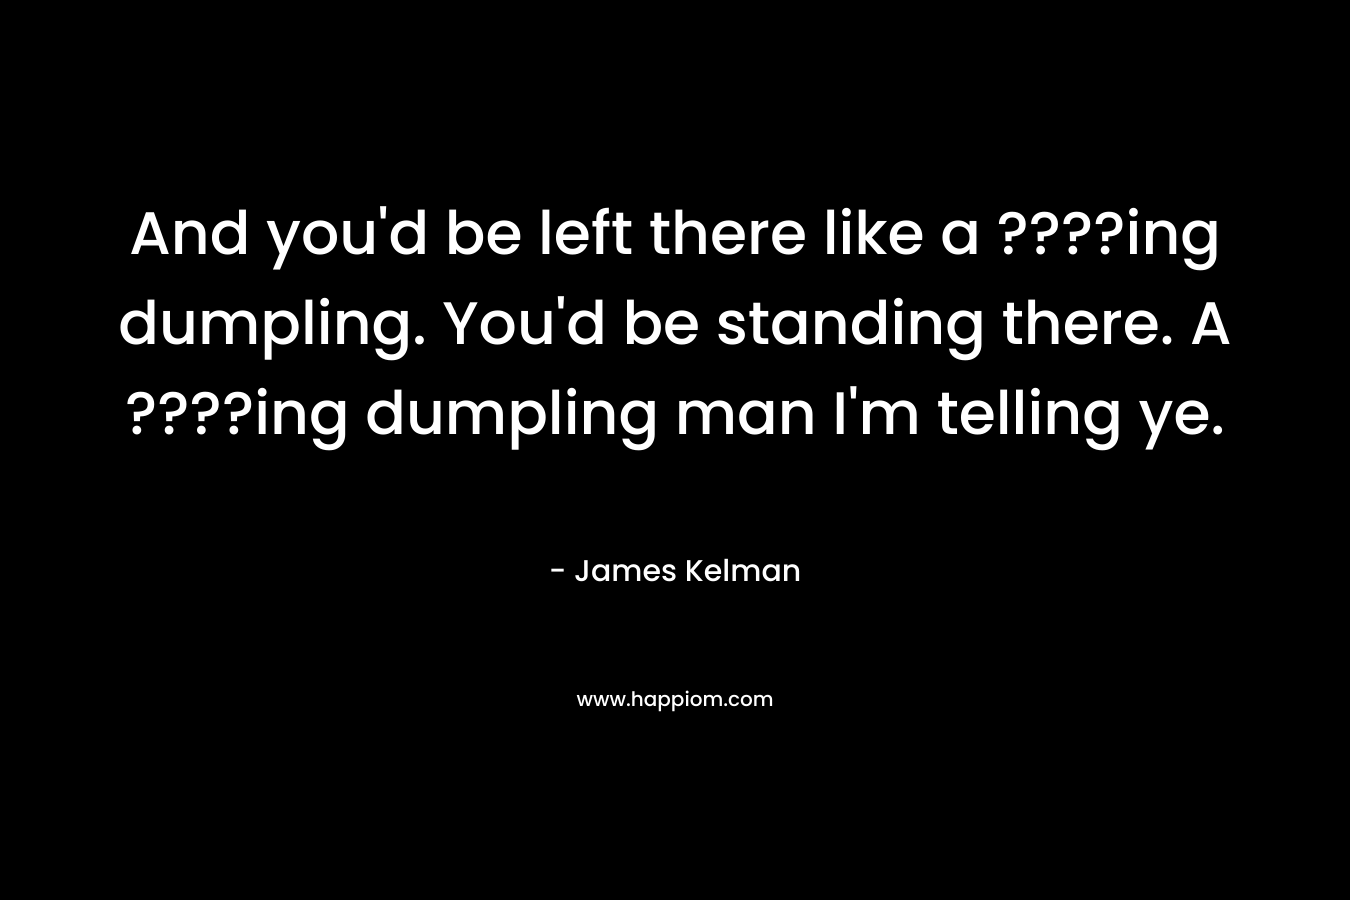 And you’d be left there like a ????ing dumpling. You’d be standing there. A ????ing dumpling man I’m telling ye. – James Kelman